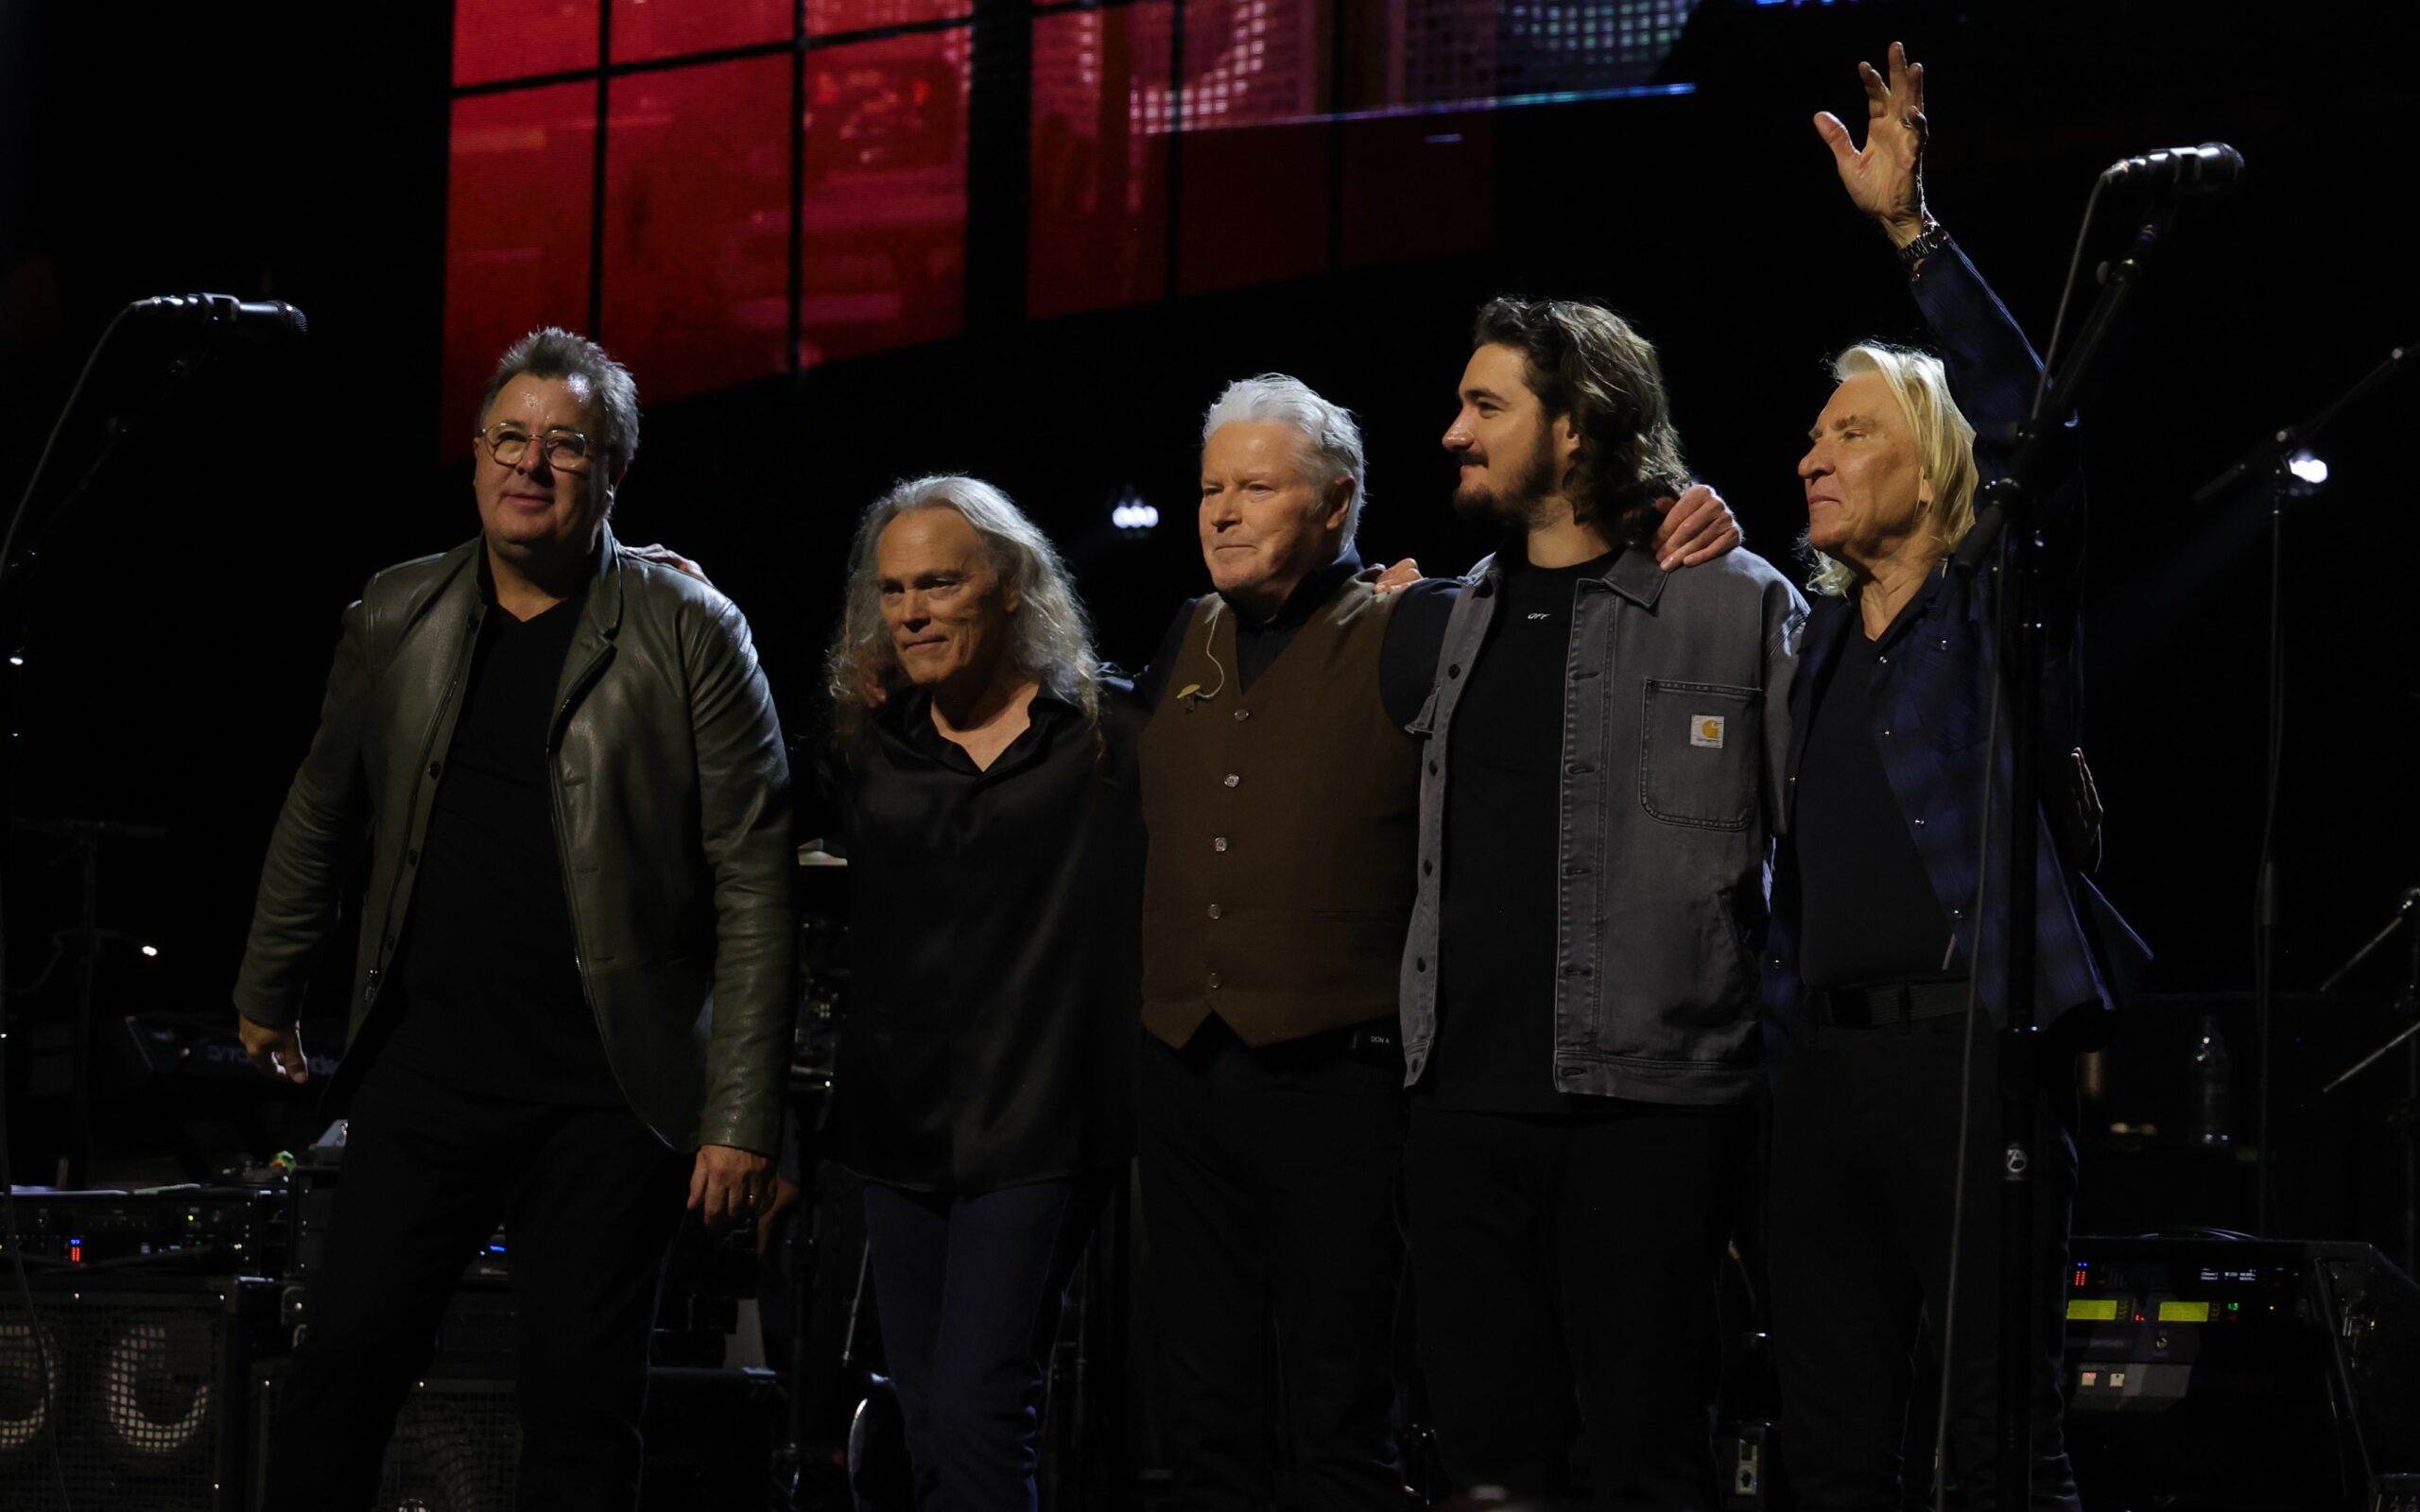 Eagles Manchester gig tickets Co-op Live last ever UK shows